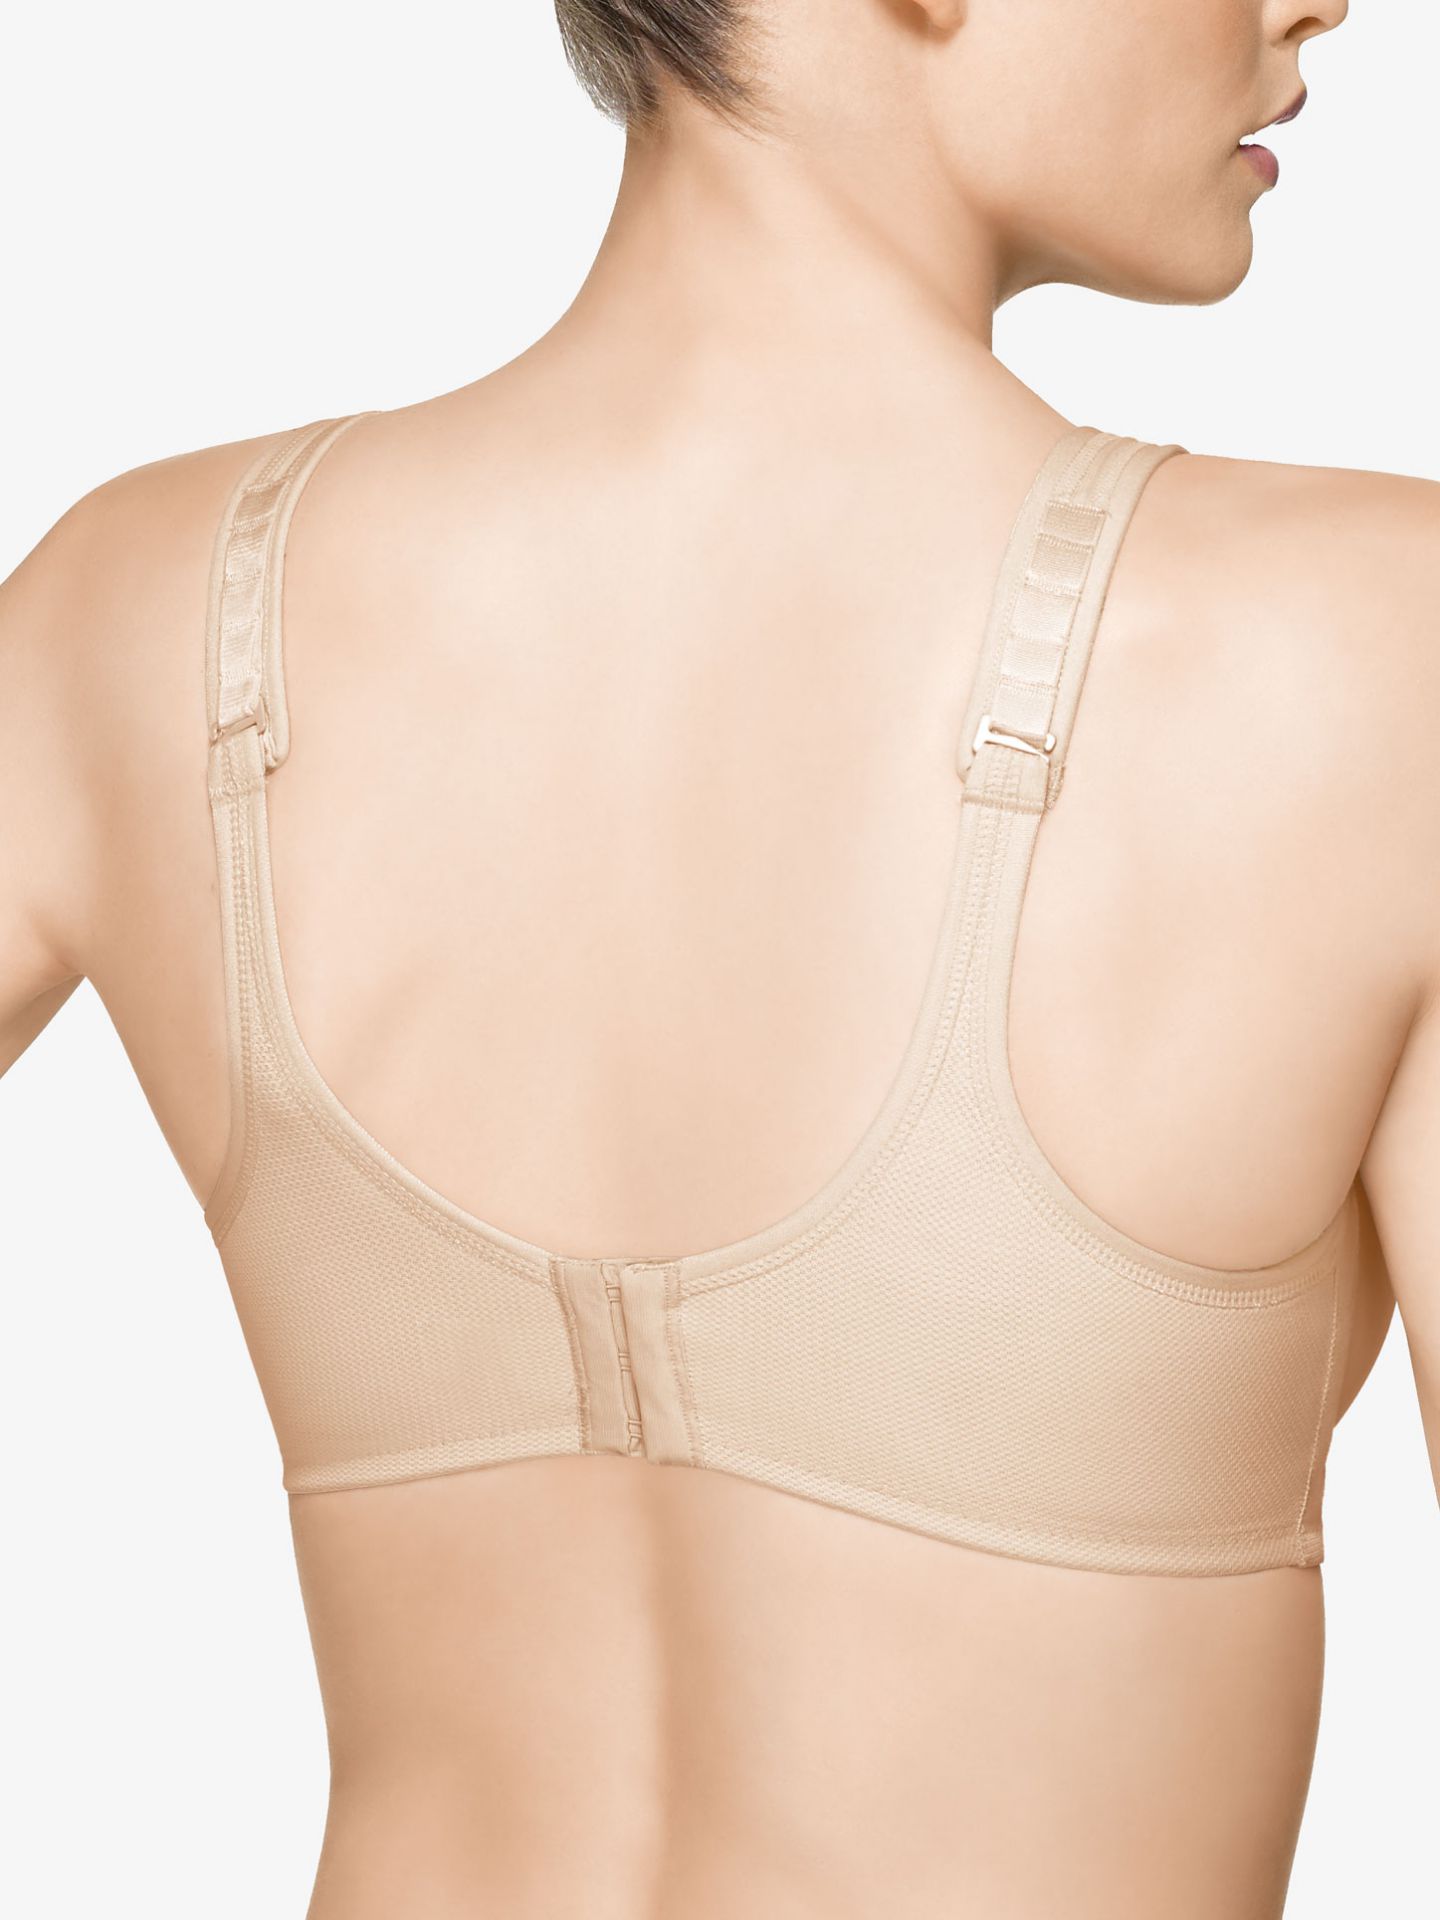 Wacoal Sport Simone Underwire Bra (More colors available) - 855170 -  Natural Nude